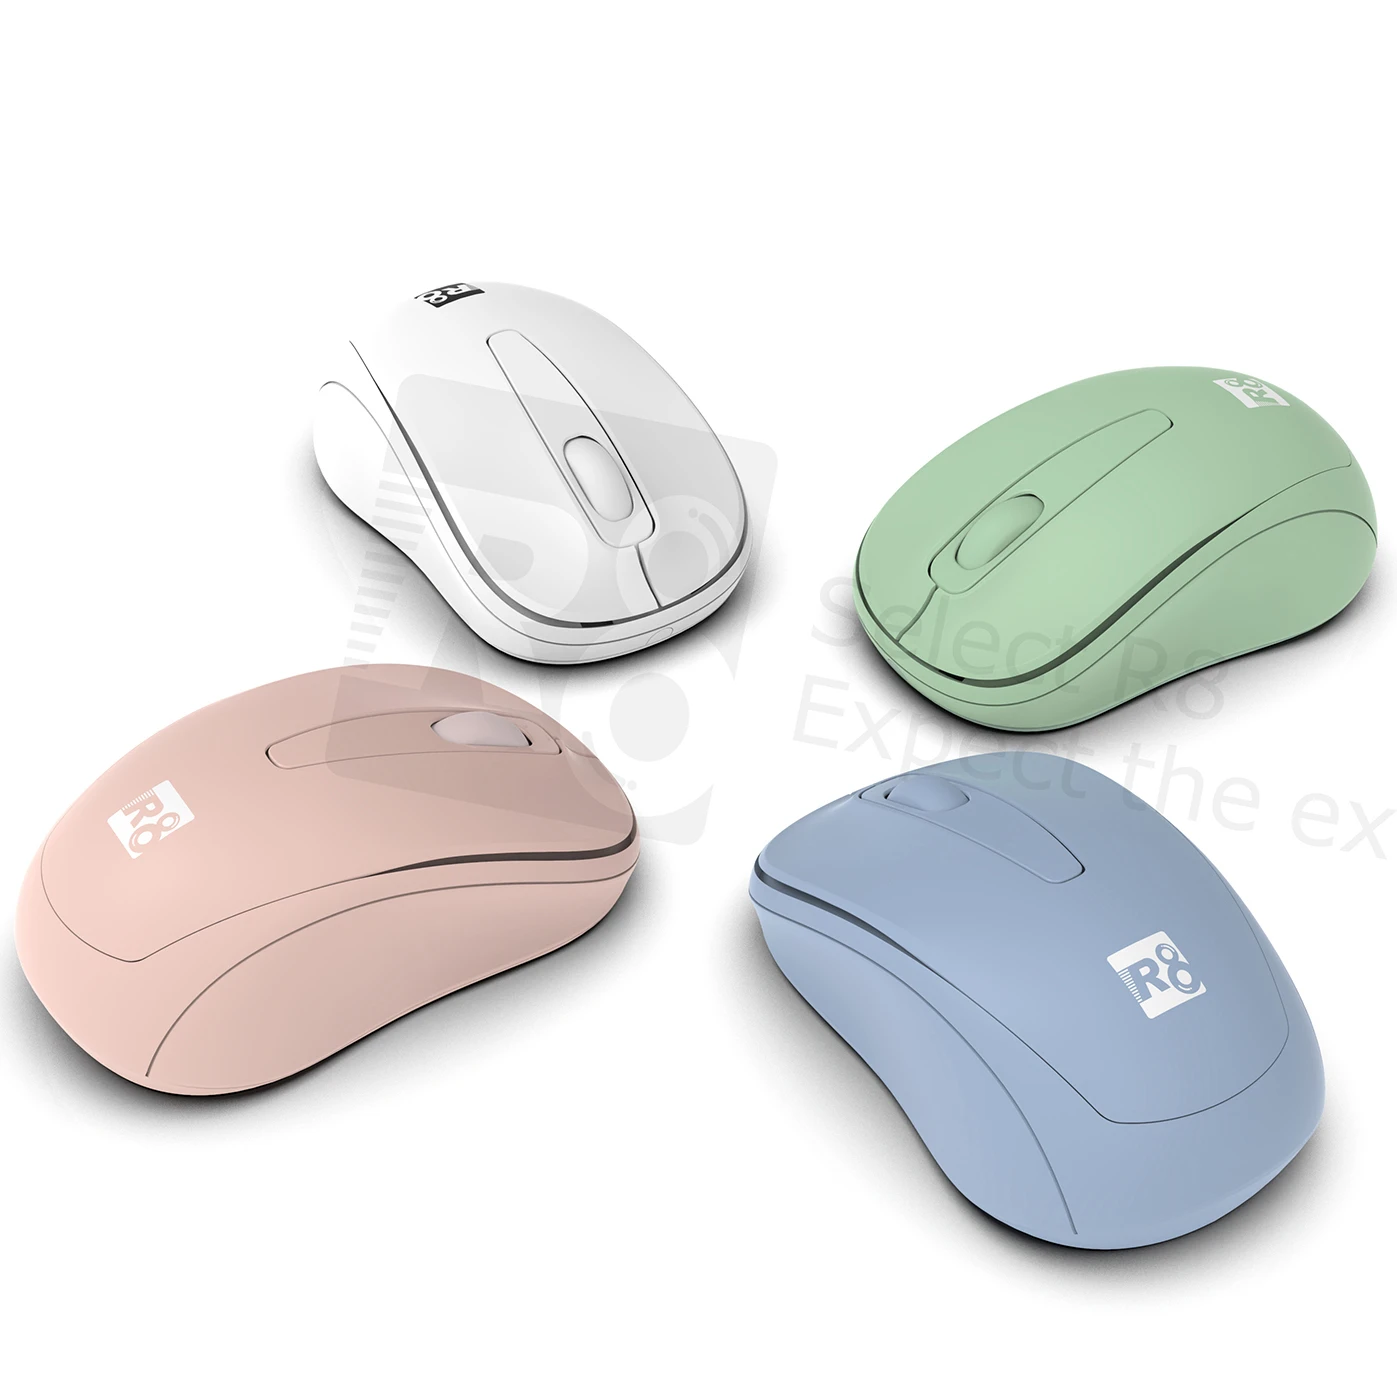 2021 New 2.4GHz Wireless 3D Optical Mouse  Cordless simplicity Mice For Laptop Desktop